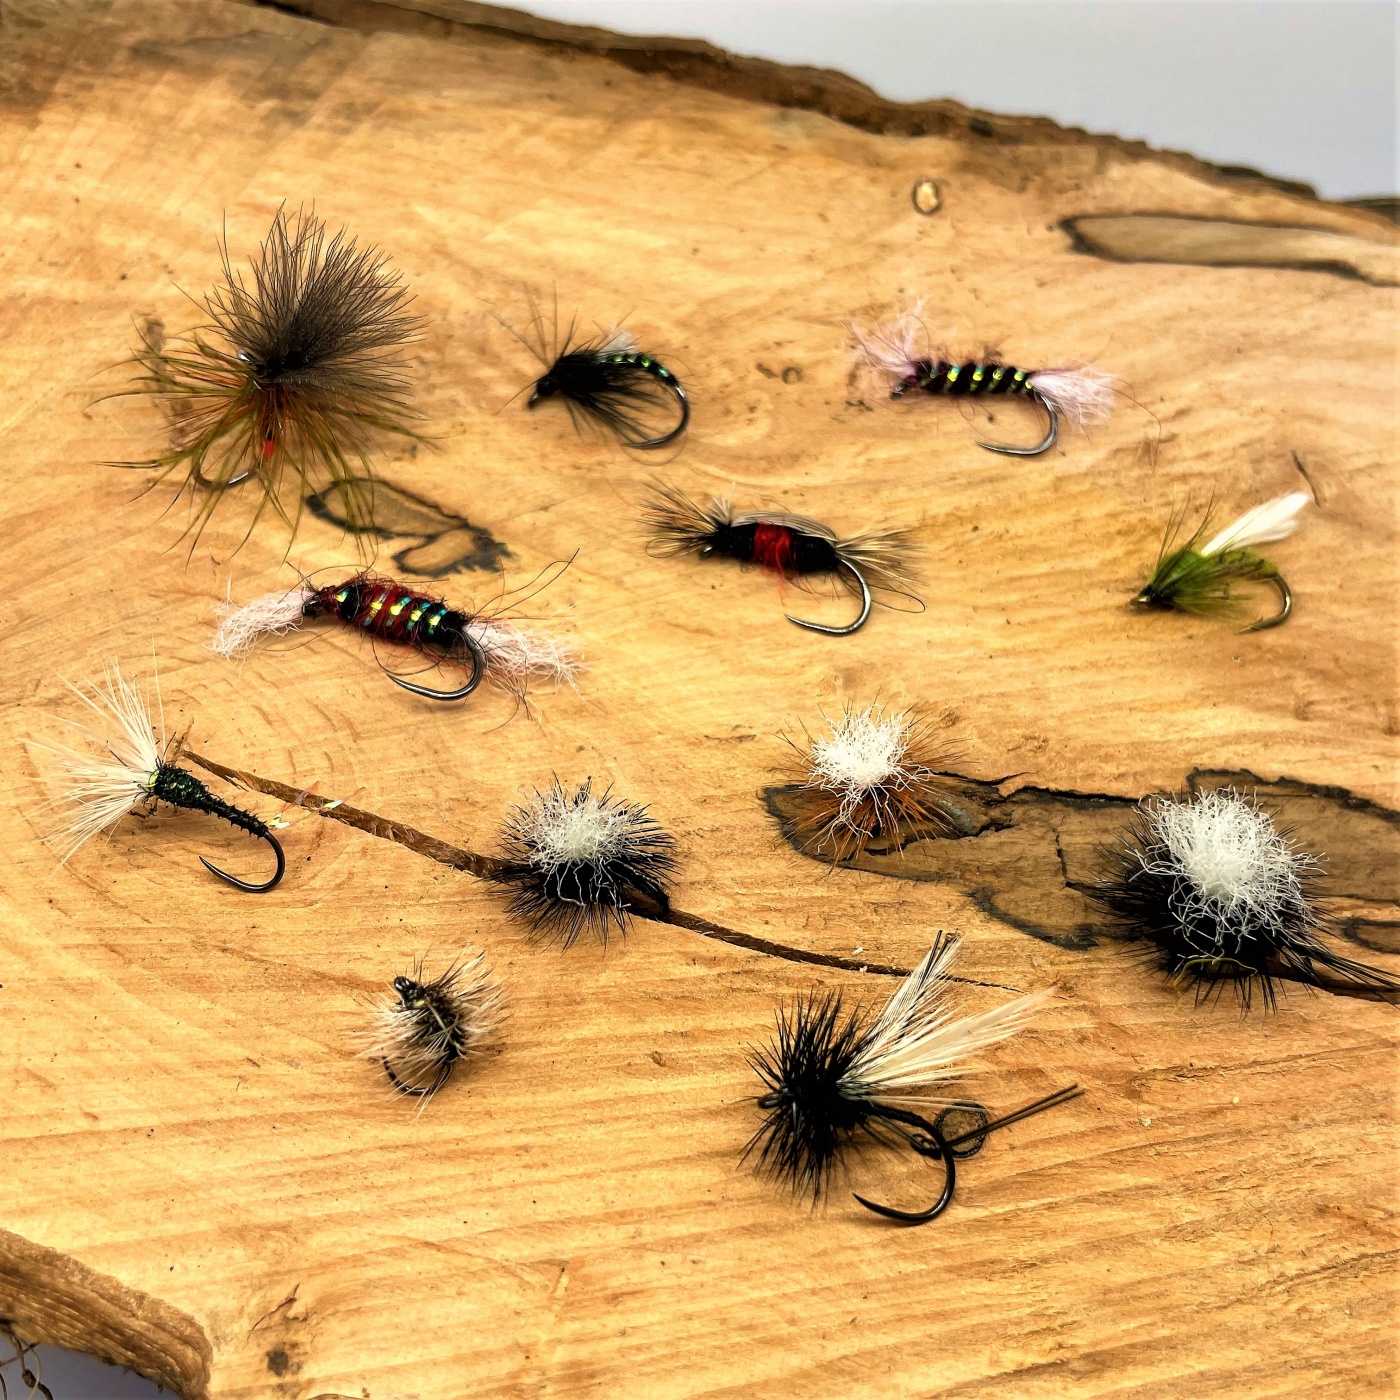 https://www.theessentialfly.com/user/products/large/Barbless%20Stillwater%20Dry%20Collection.jpg